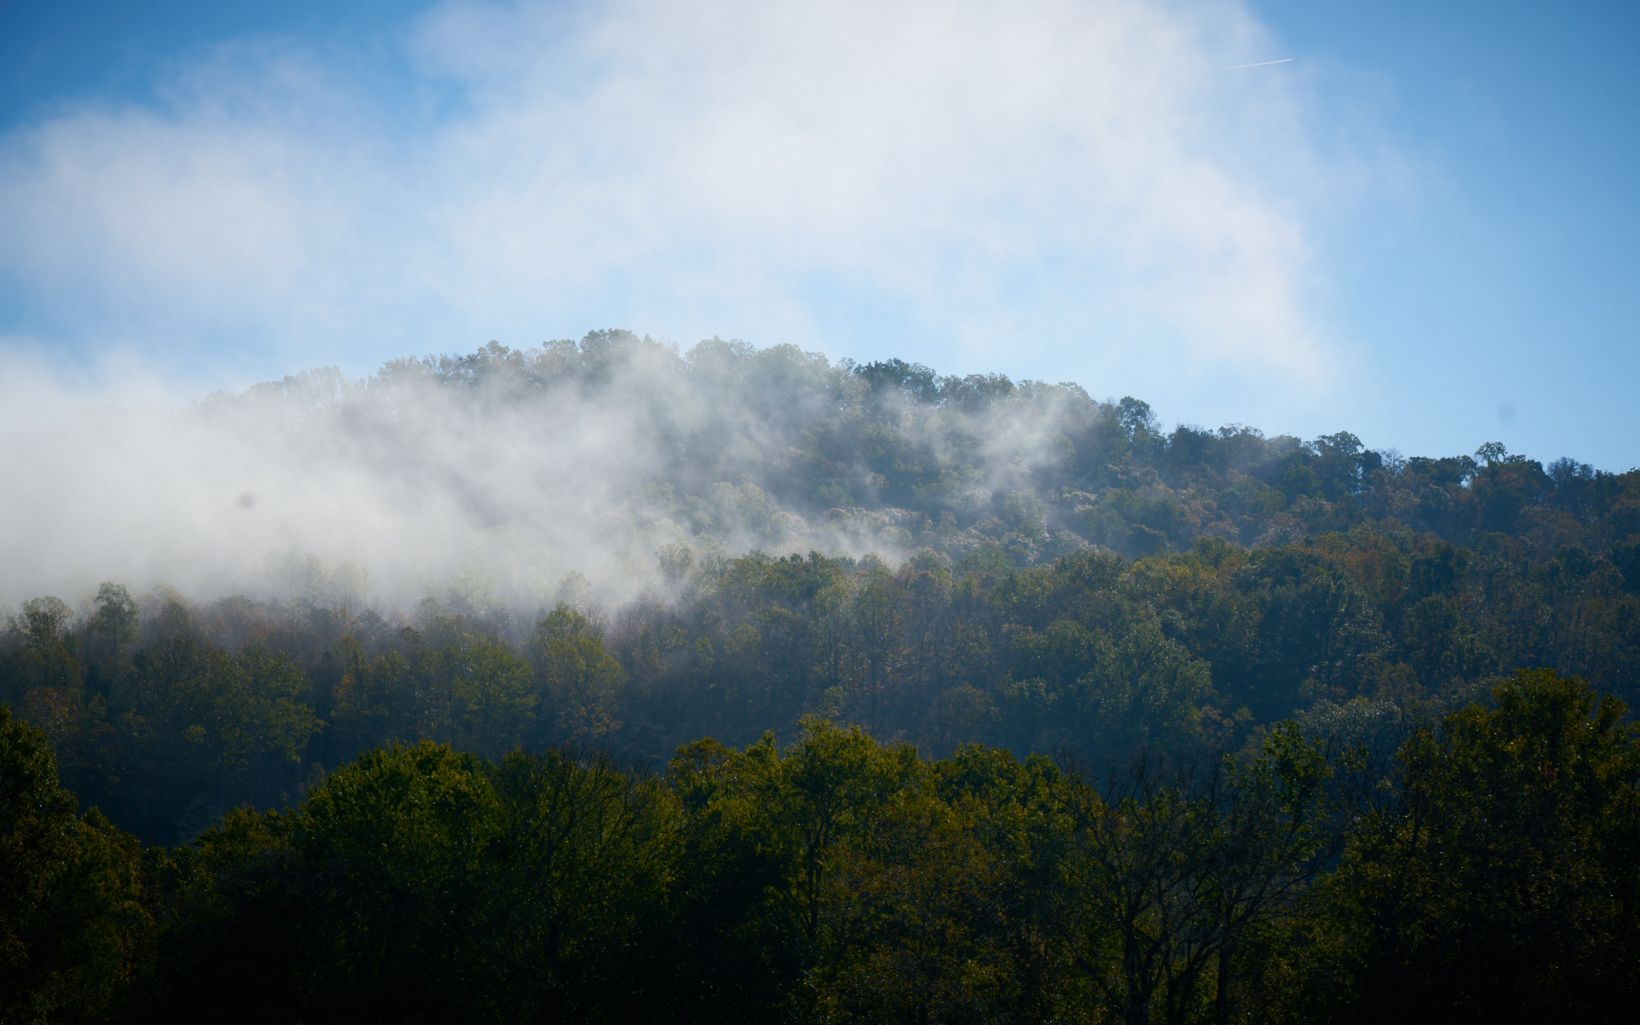 Edge of Appalachia Preserve Mist rises up through the forest and over the hills of the preserve, making this a nature photography destination. © TJ Vissing